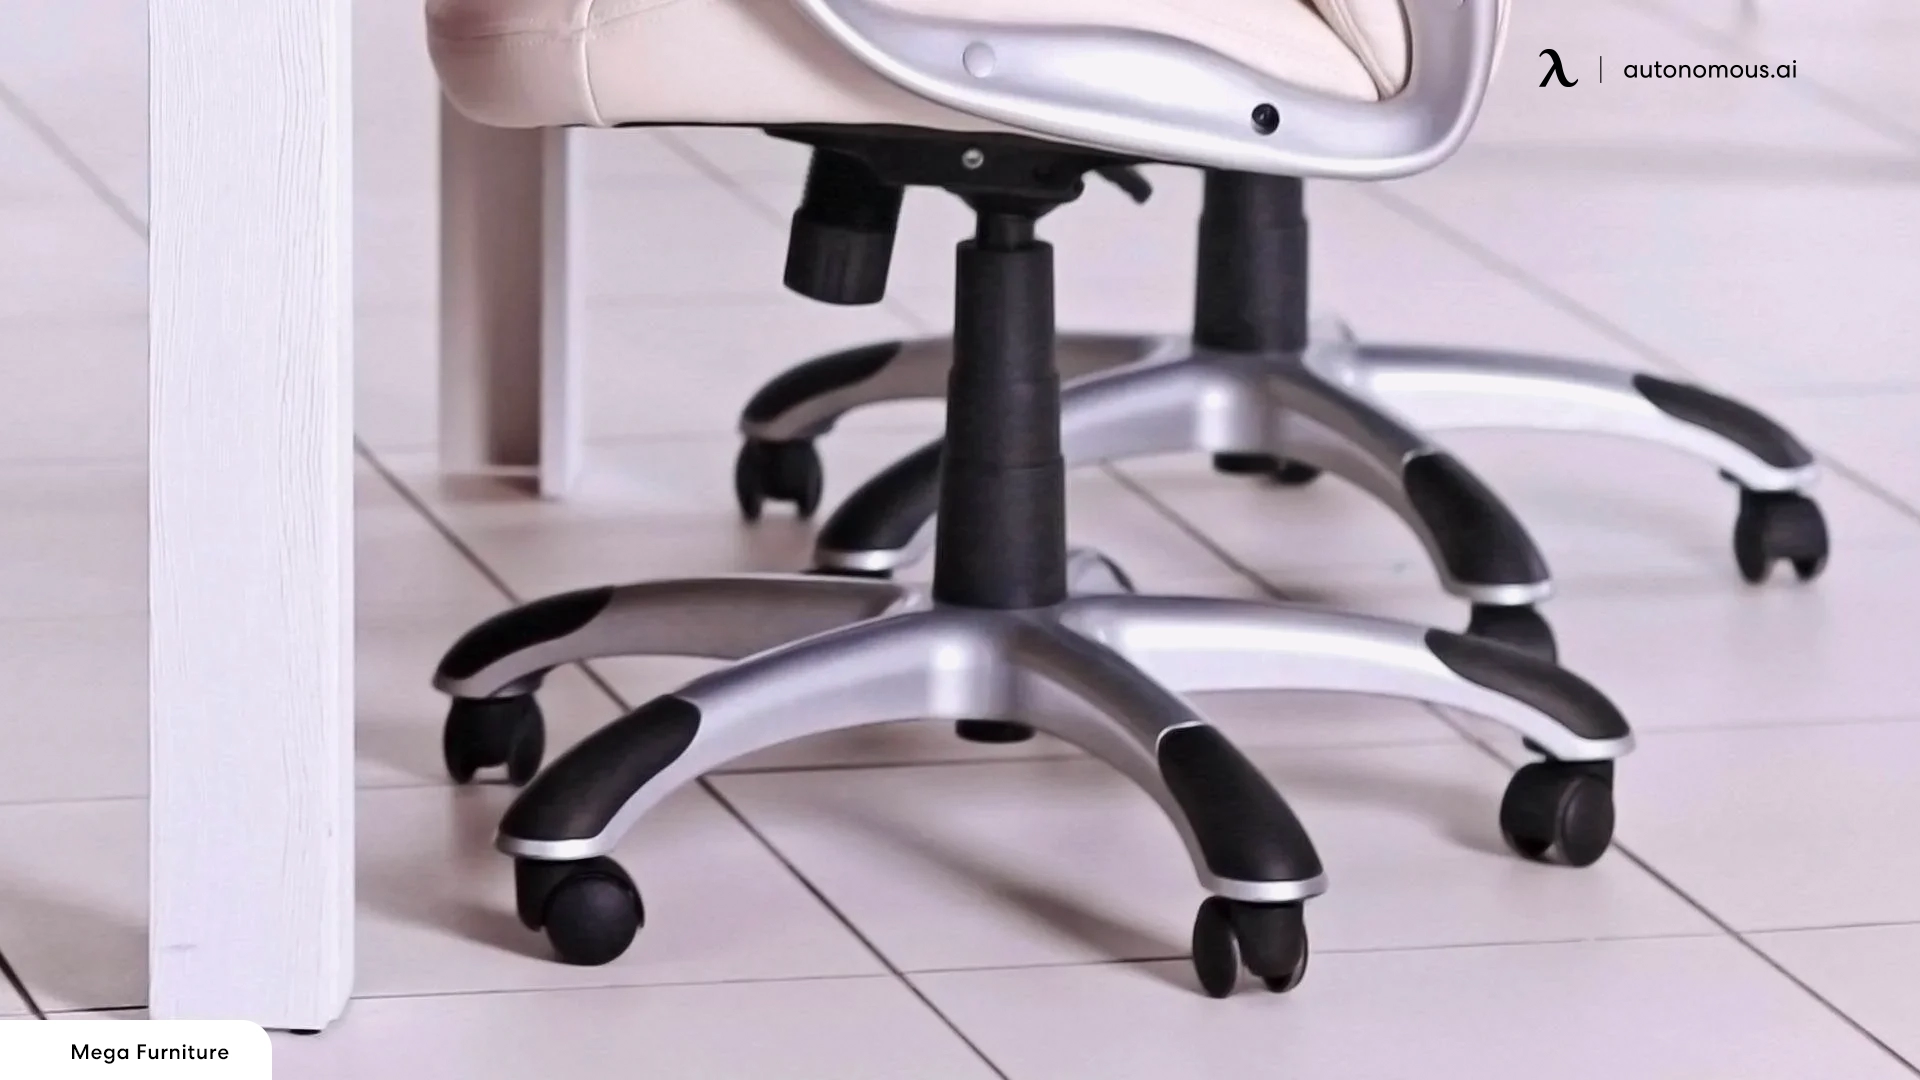 Why Do Office Chairs Have Five Legs with Casters?